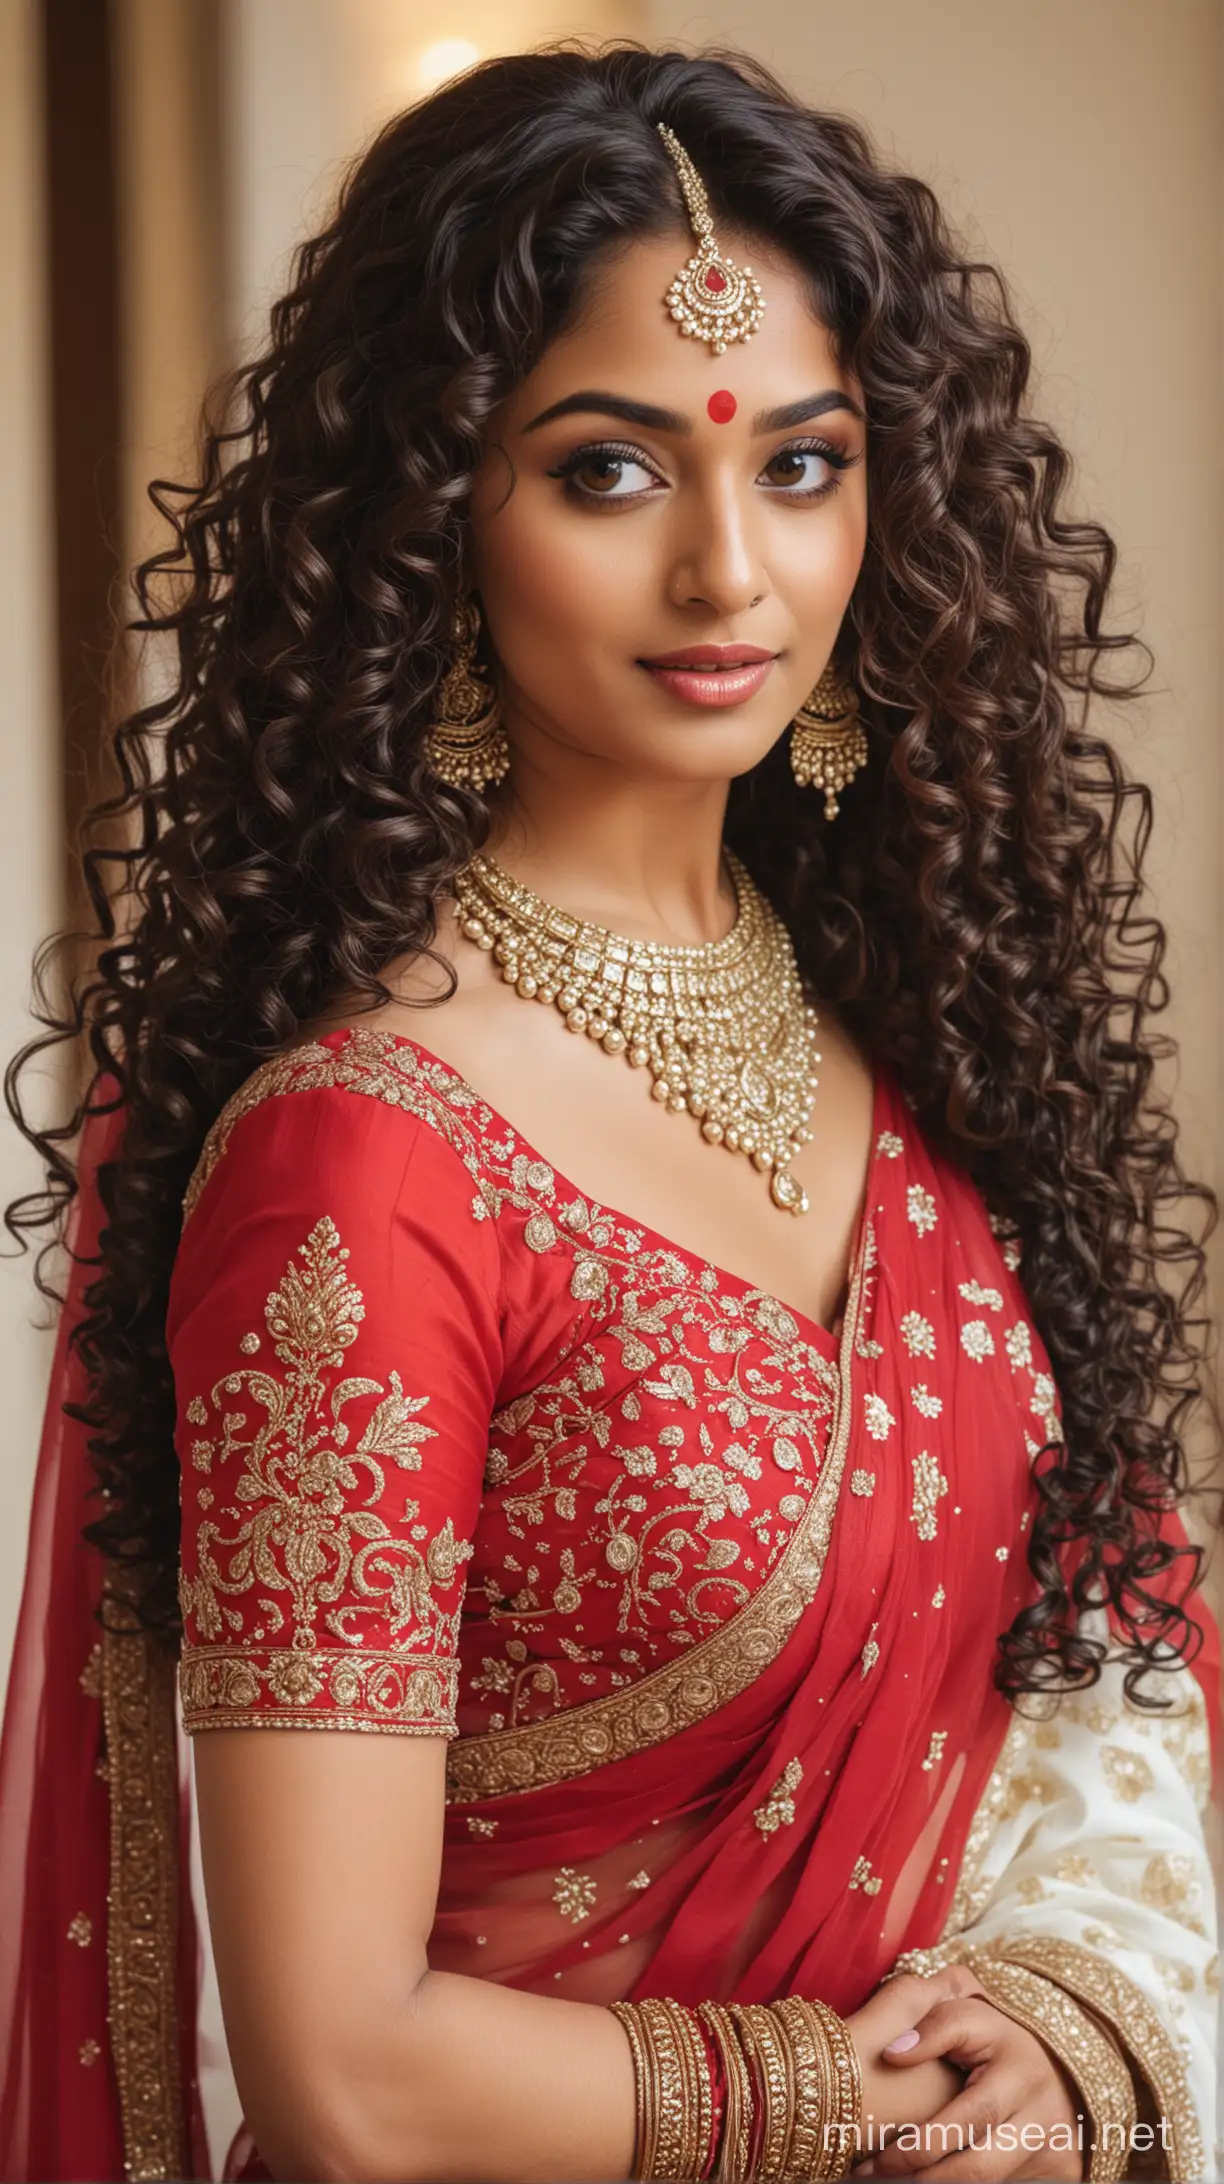 Traditional Indian Bride in Red Saree with Ornate Jewelry